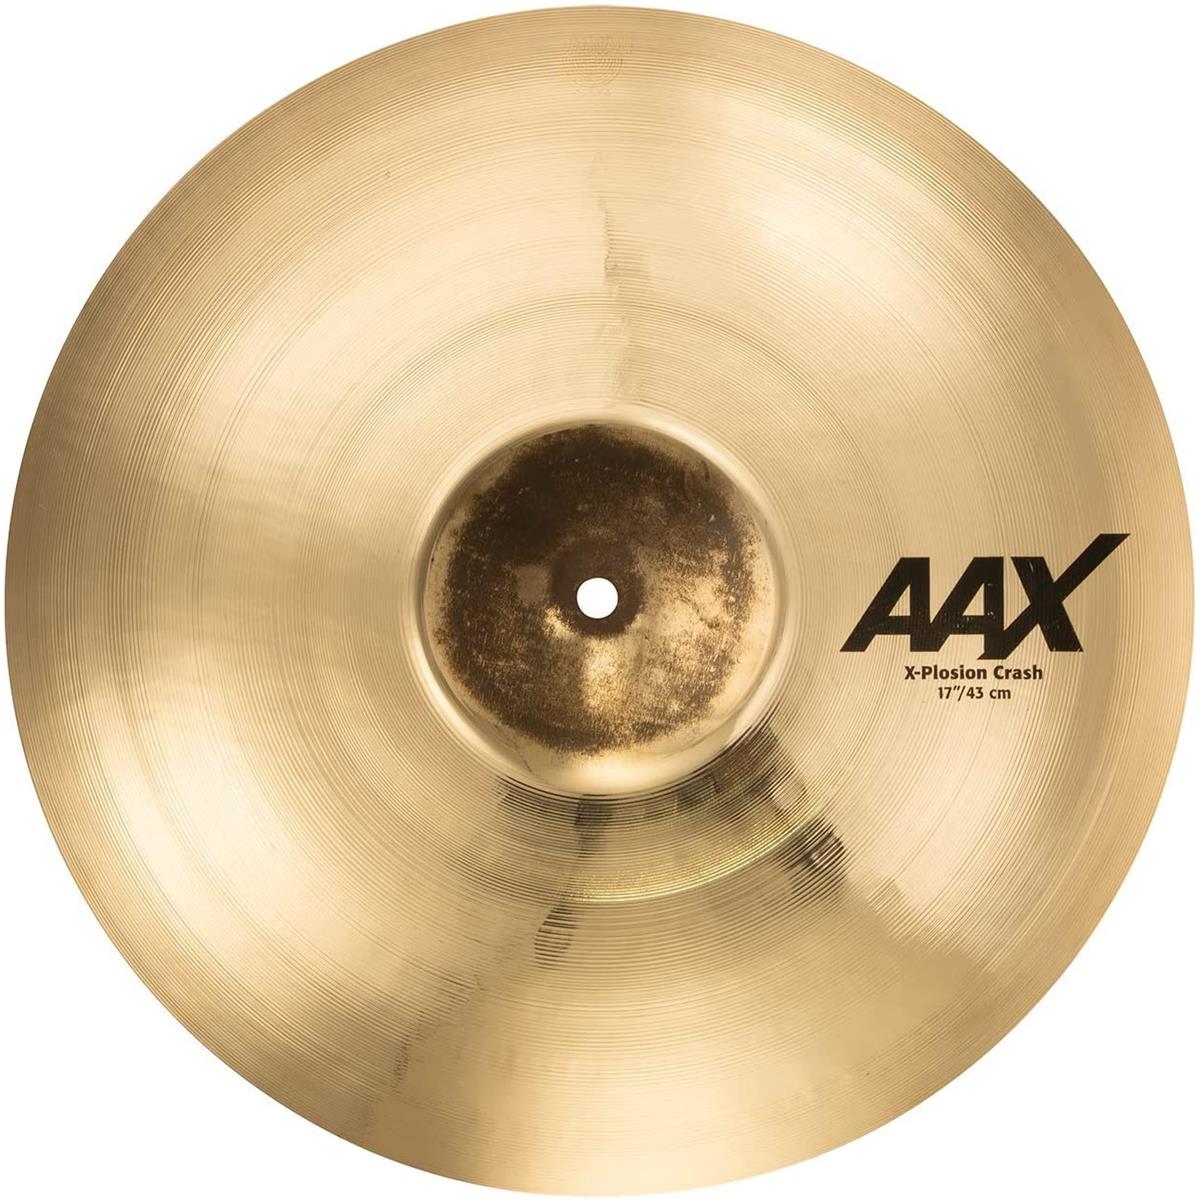 Sabian 17" AAX X-Plosion Crash Cymbal, Medium-Thin, Brilliant Finish, Golden Bursting with energy, the innovative SABIAN 17" AAX X-Plosion Crash explodes with fuller, punchier power. The SABIAN AAX series delivers consistently bright, crisp, clear and cutting responses - AAX is the ultimate Modern Bright sound!